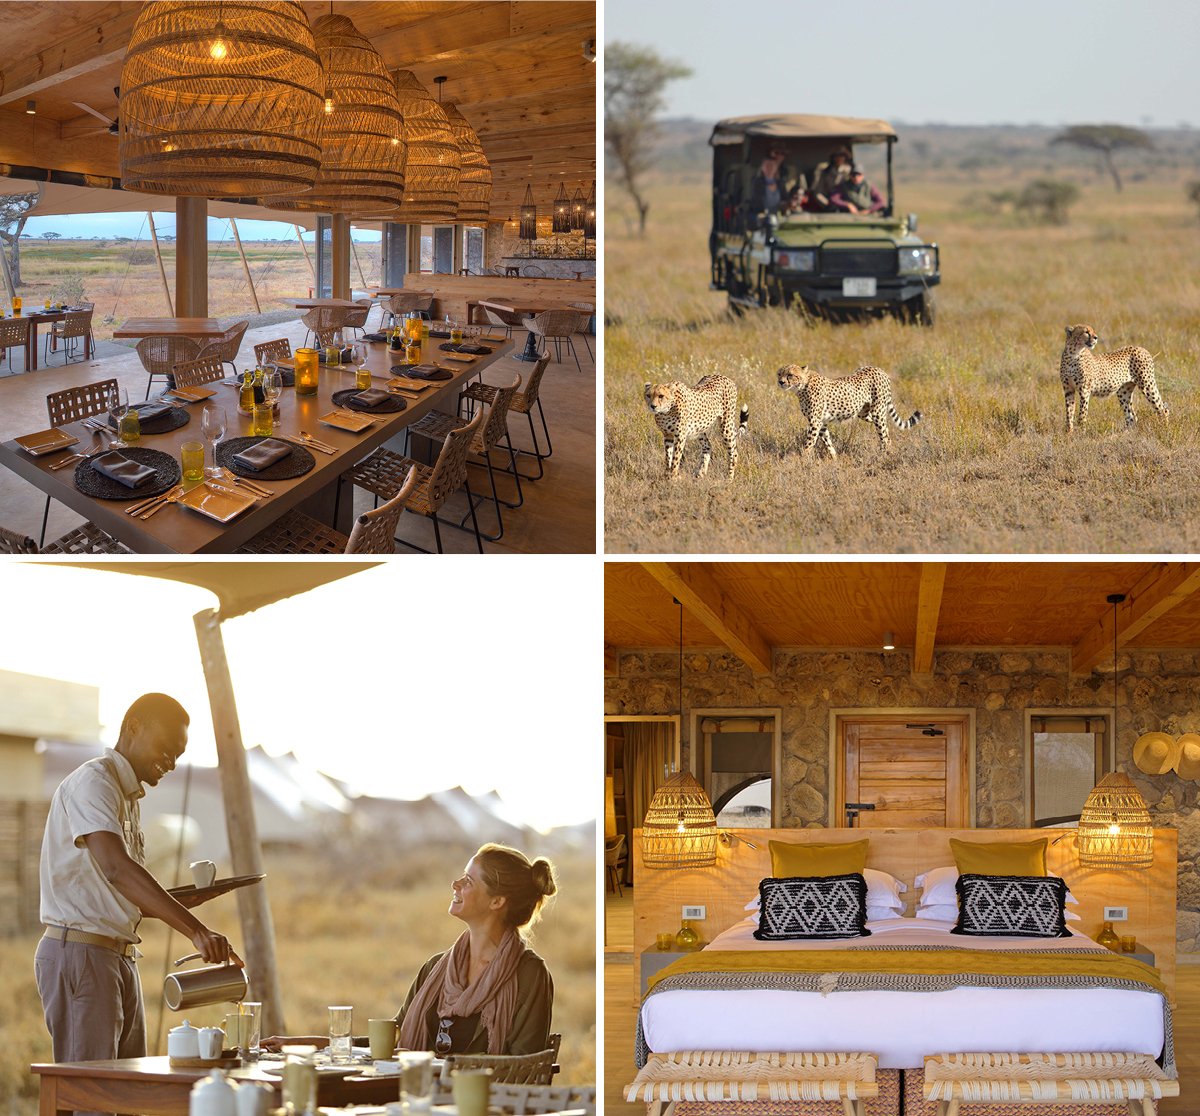 #NamiriPlains, in Eastern #Serengeti offers unparalleled privacy with no other camps within an hour’s drive.

📧 info@worldtourssafaris.com
📲 +255 686 104 236
🌍 worldtourssafaris.com
📸 @AsiliaAfrica

#WorldToursTz #Travel #Adventure #Safari #Luxury #Safari #Tanzania